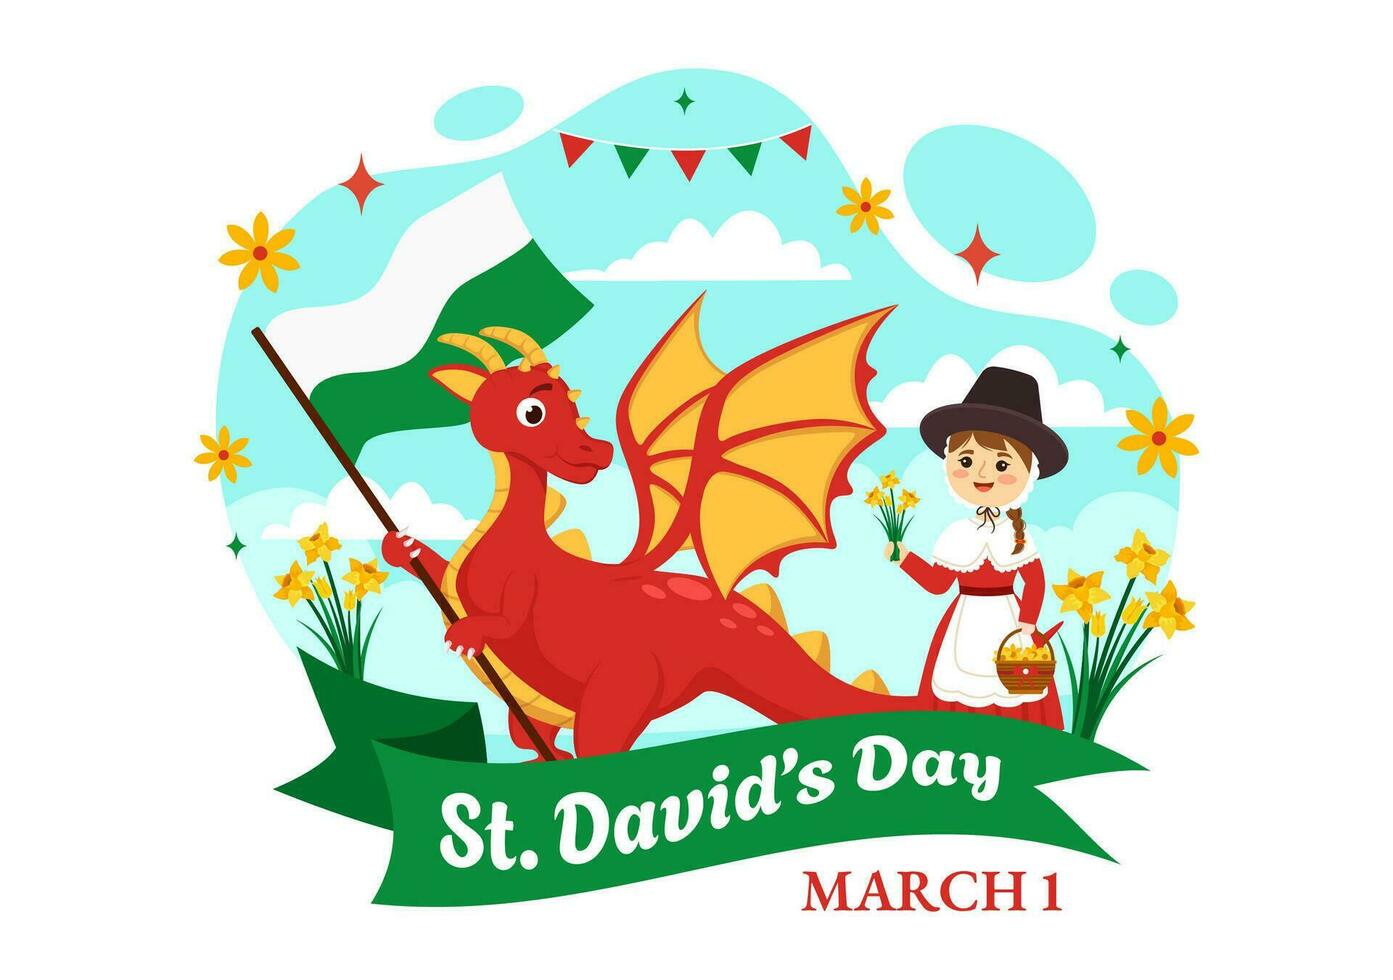 Happy St David's Day Vector Illustration on March 1 with Kids, Welsh Dragons and Yellow Daffodils in Celebration Holiday Cartoon Background Design